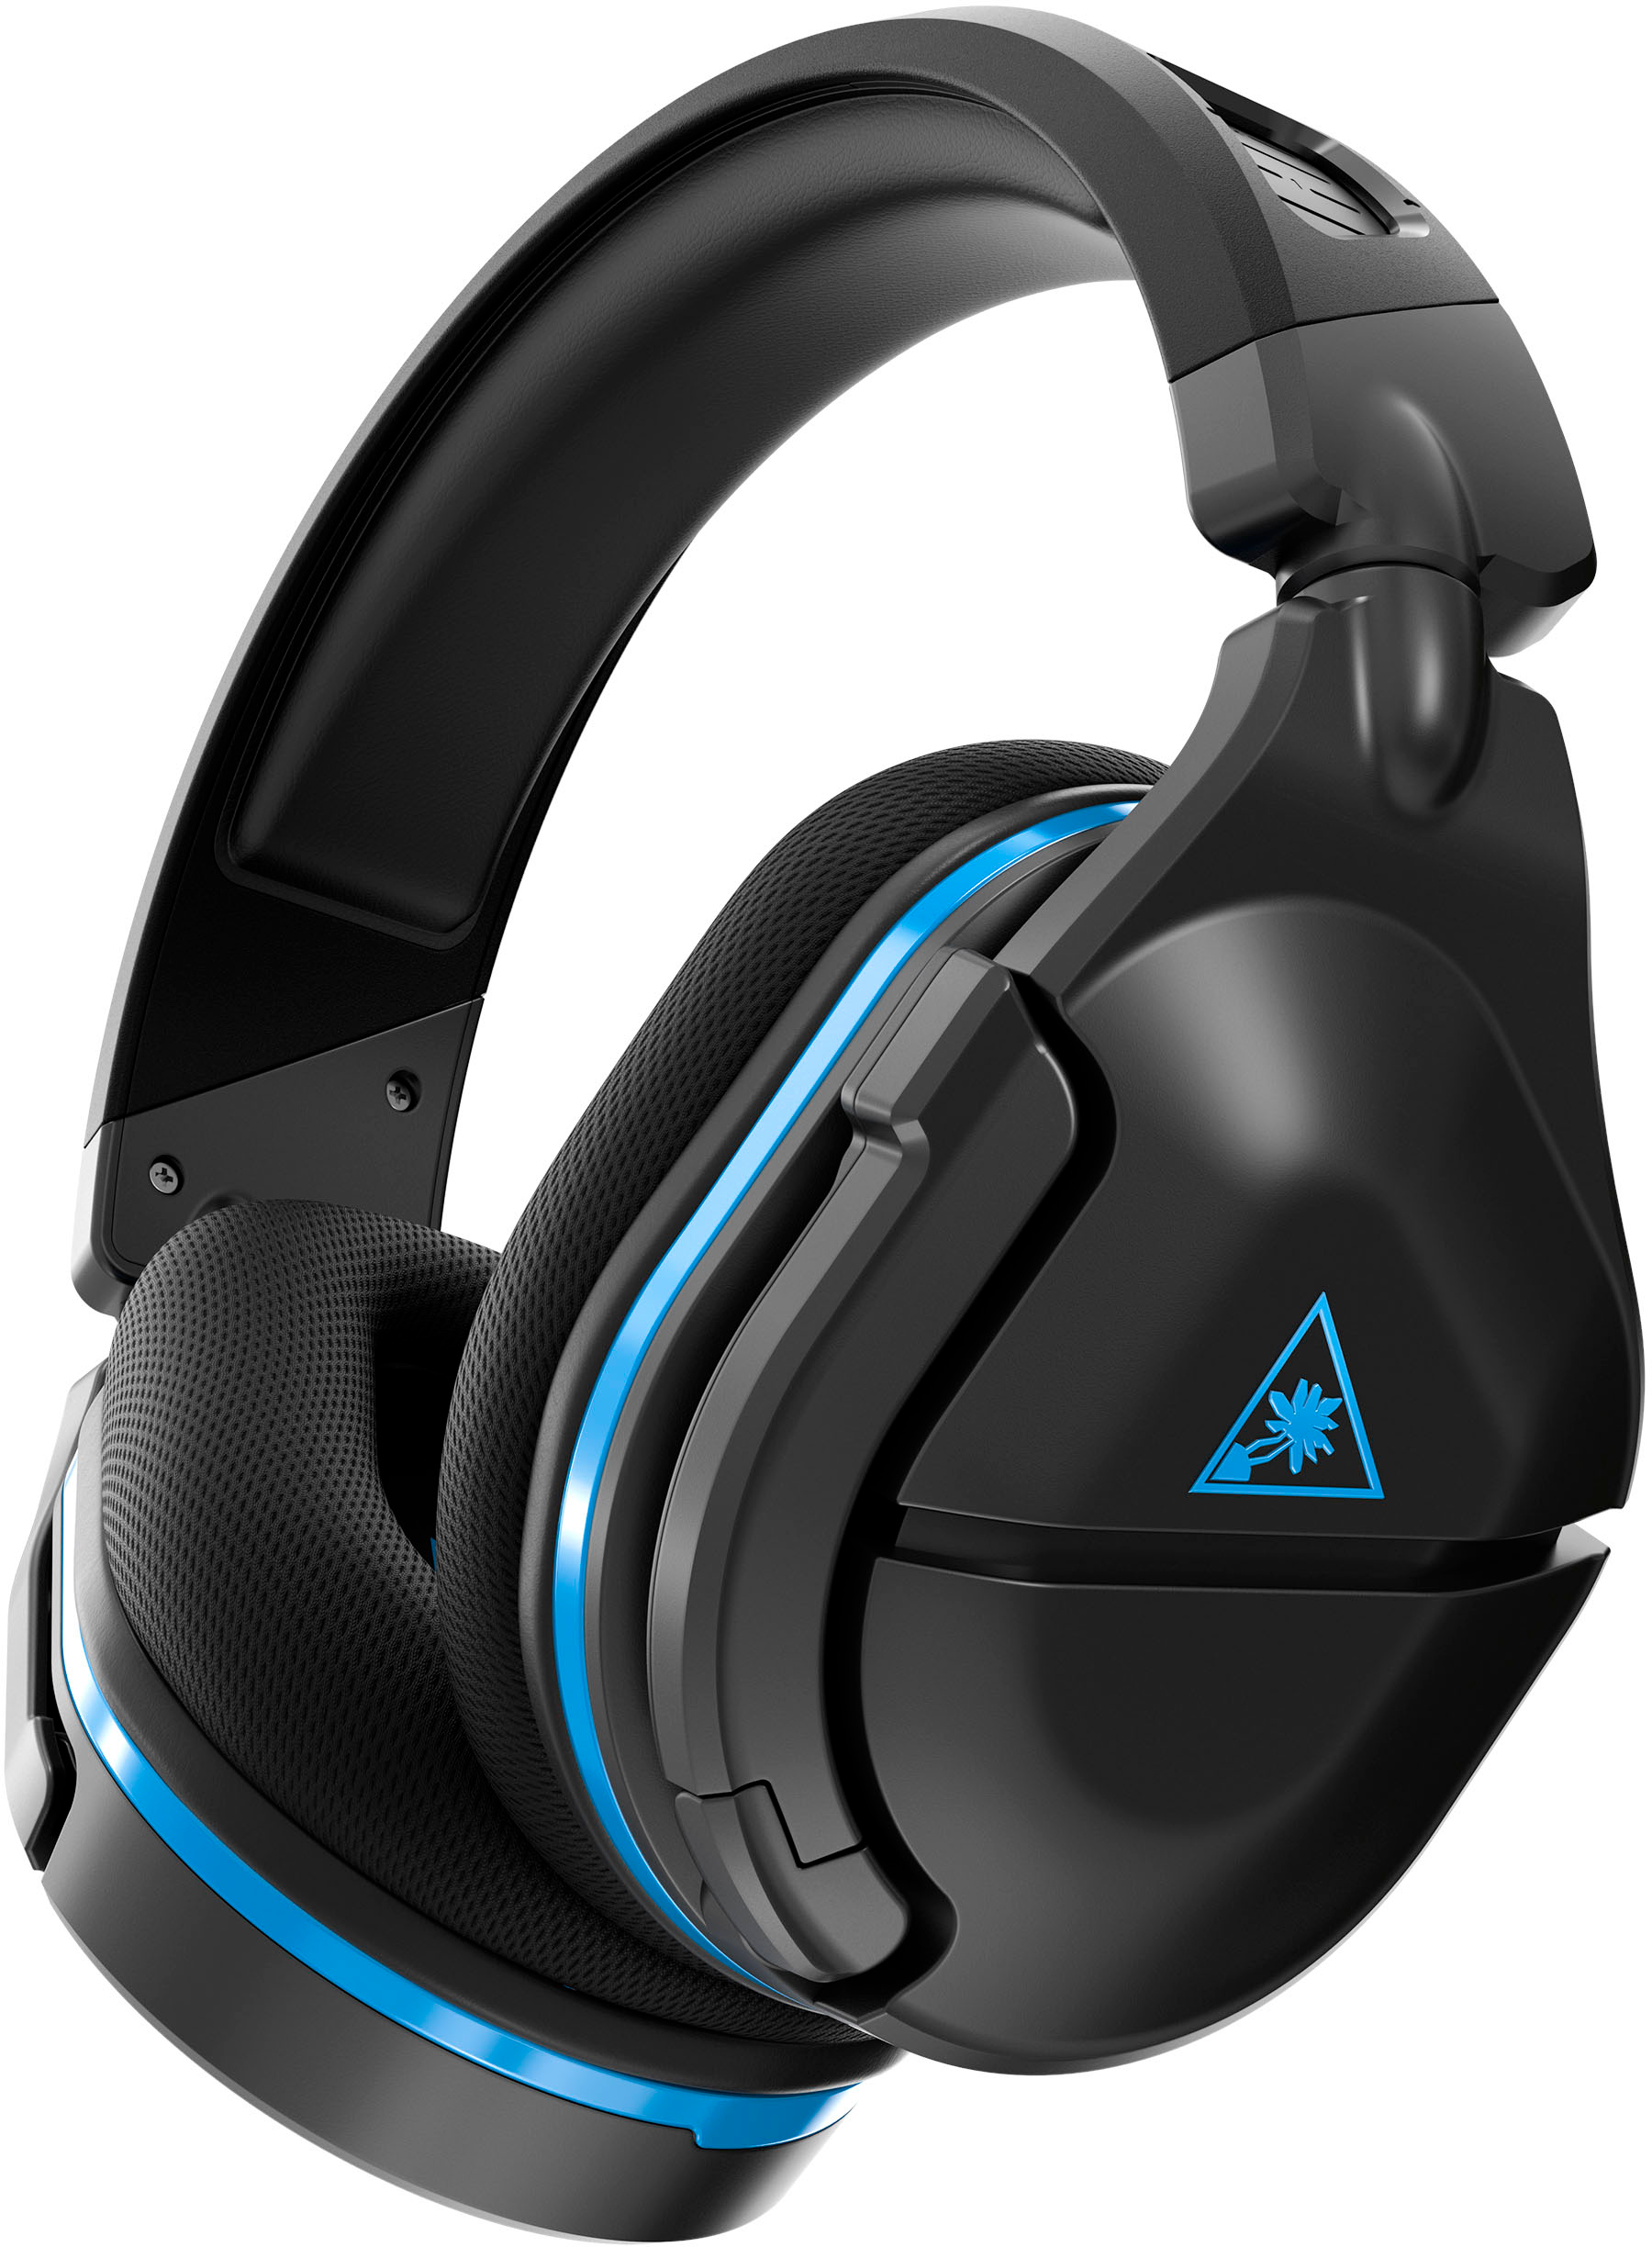 Angle View: Turtle Beach - Stealth 600 Gen 2 USB PS Wireless Gaming Headset for PS5, PS4 - Black